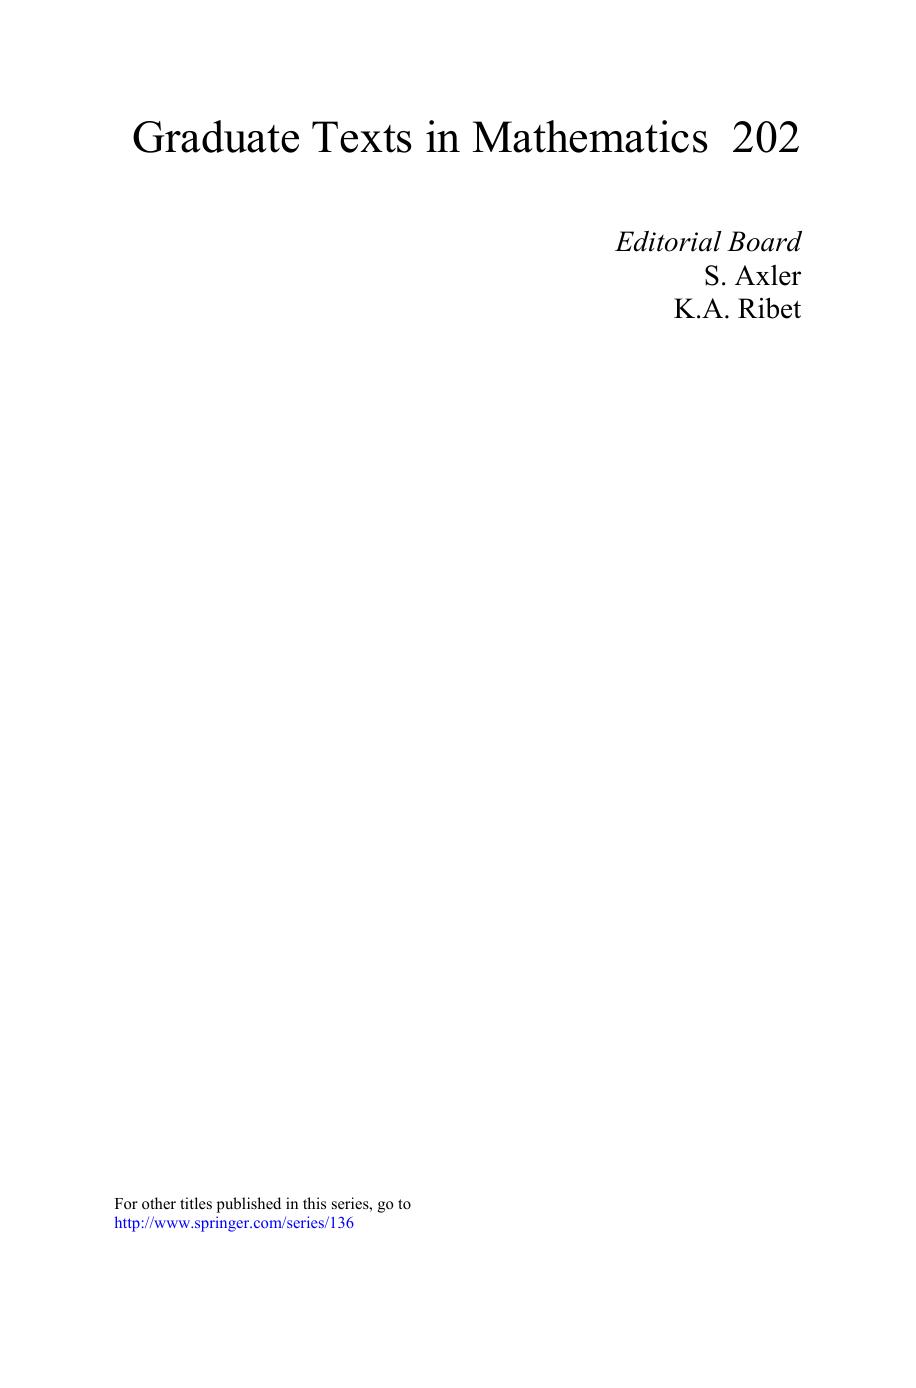 Introduction to Topological Manifolds, 2e by JM Lee